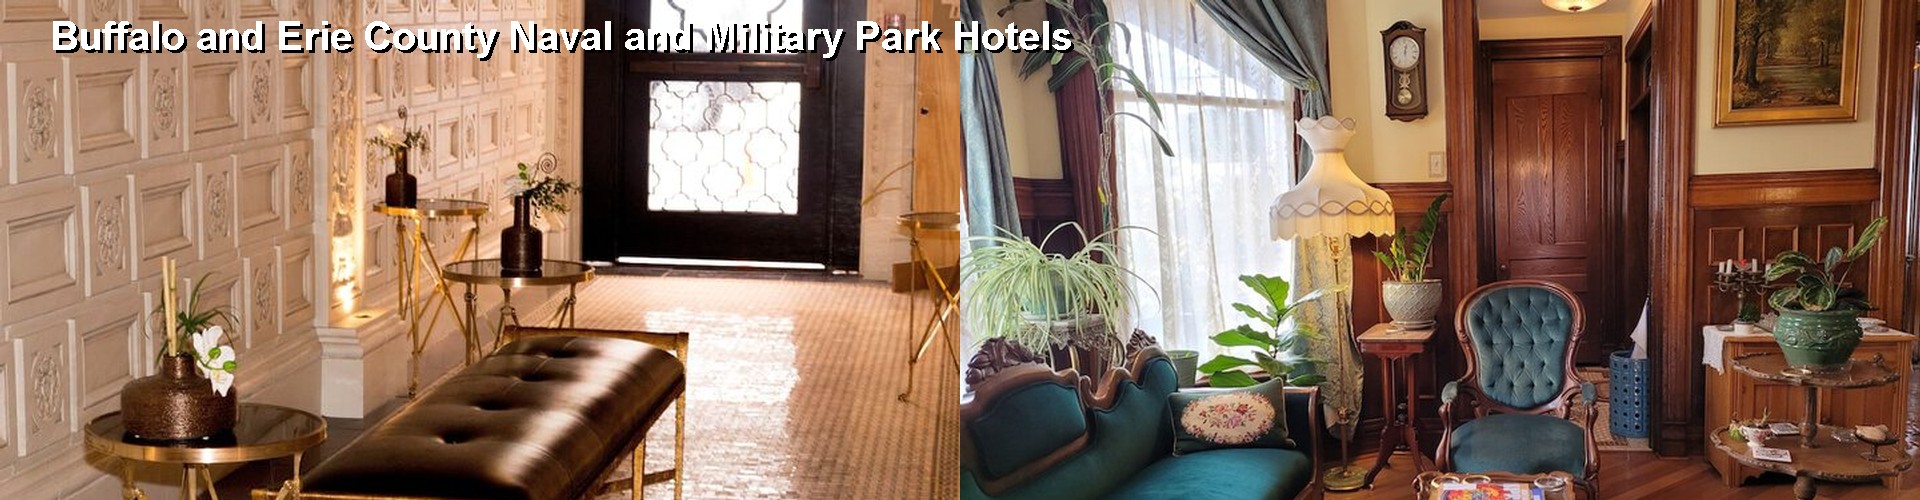 5 Best Hotels near Buffalo and Erie County Naval and Military Park